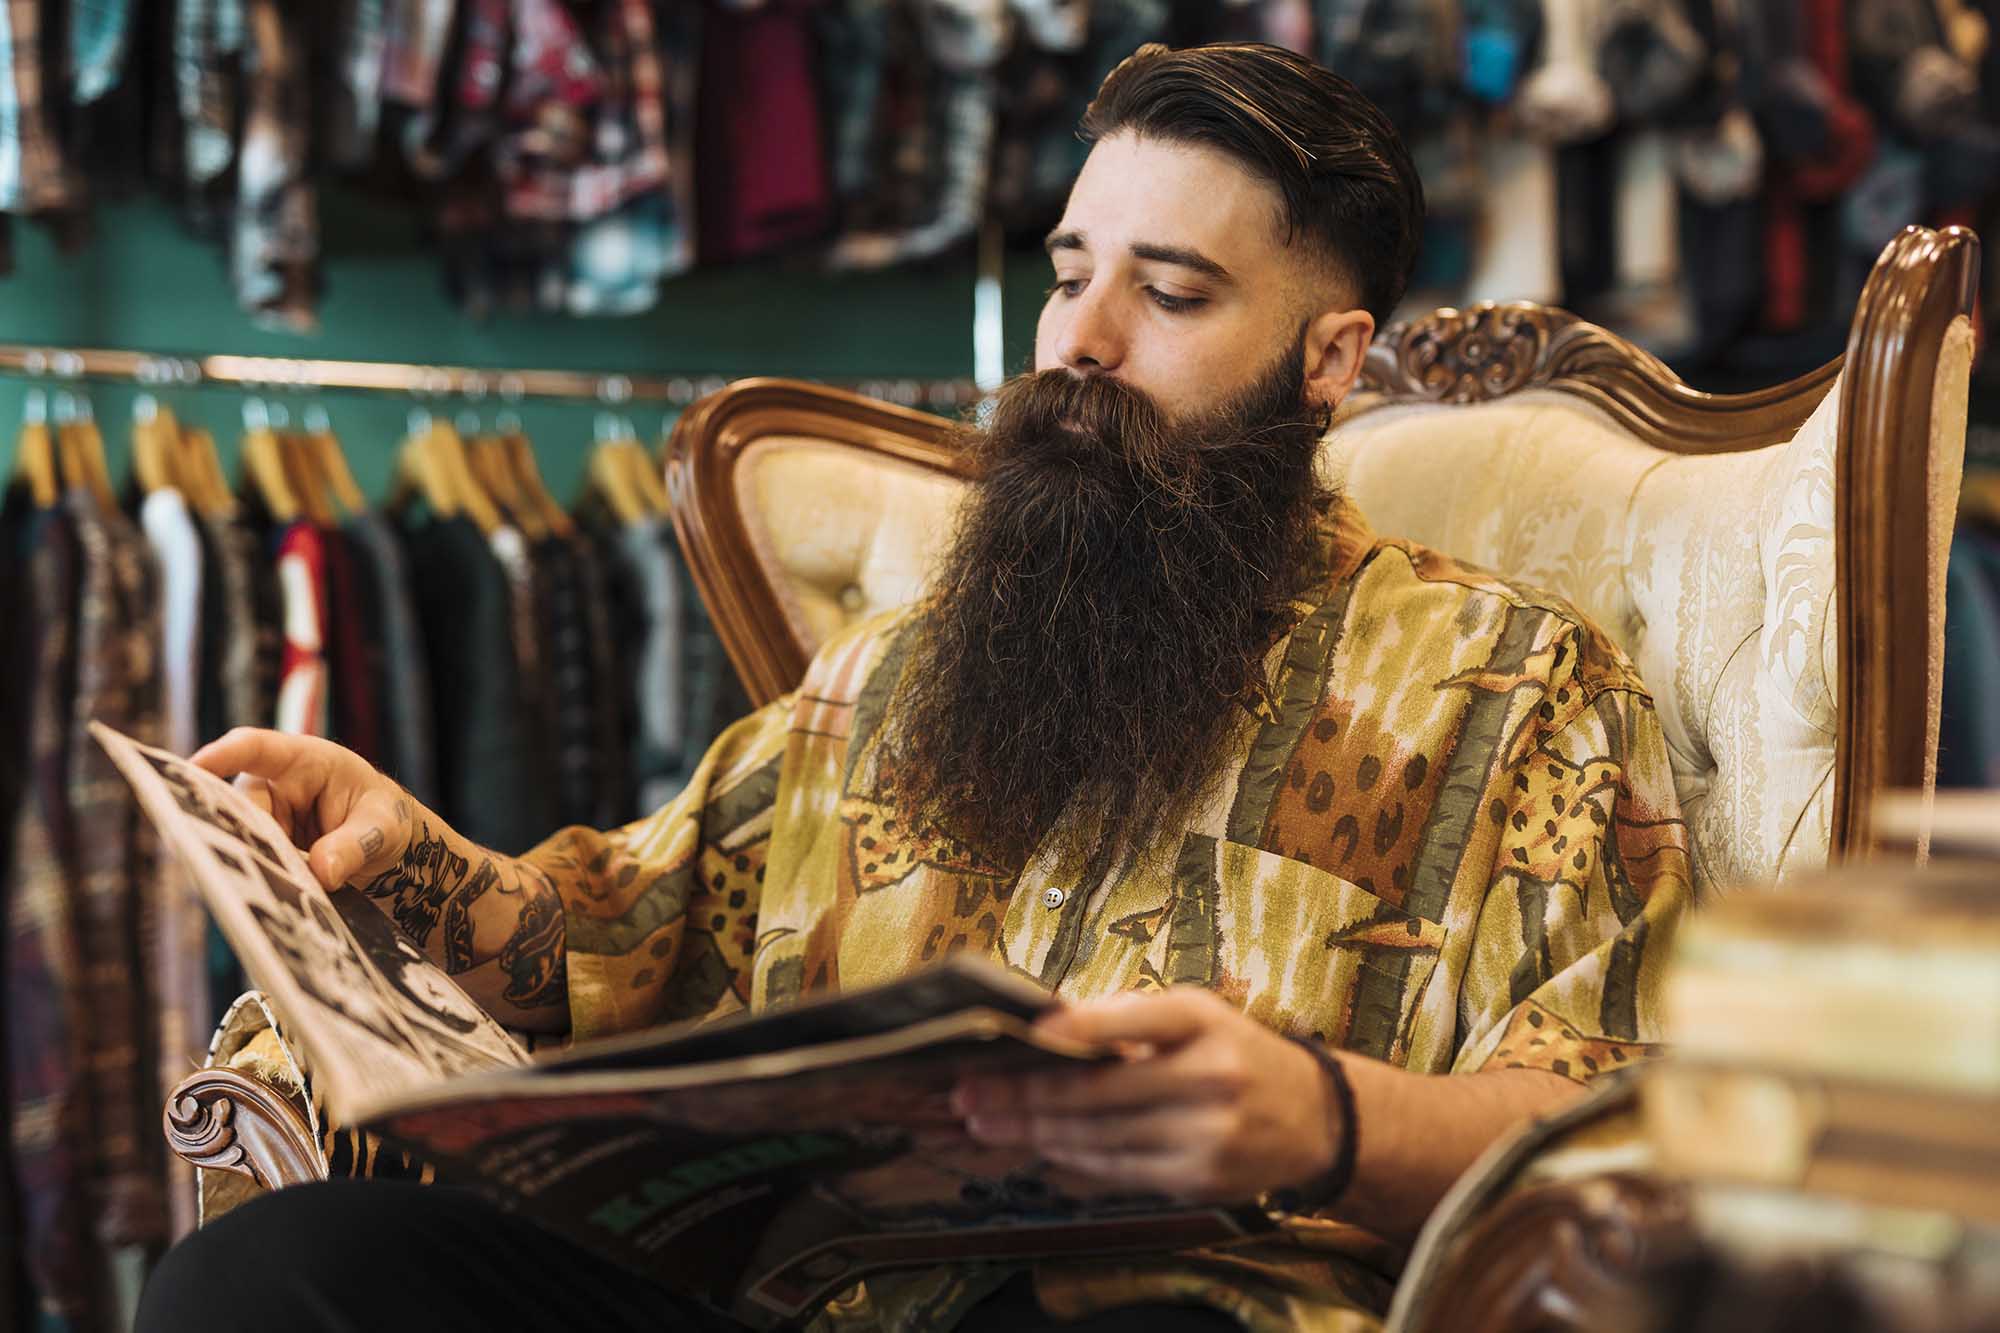 bearded-fashionable-young-man-sitting-chair-looking-magazine-shop